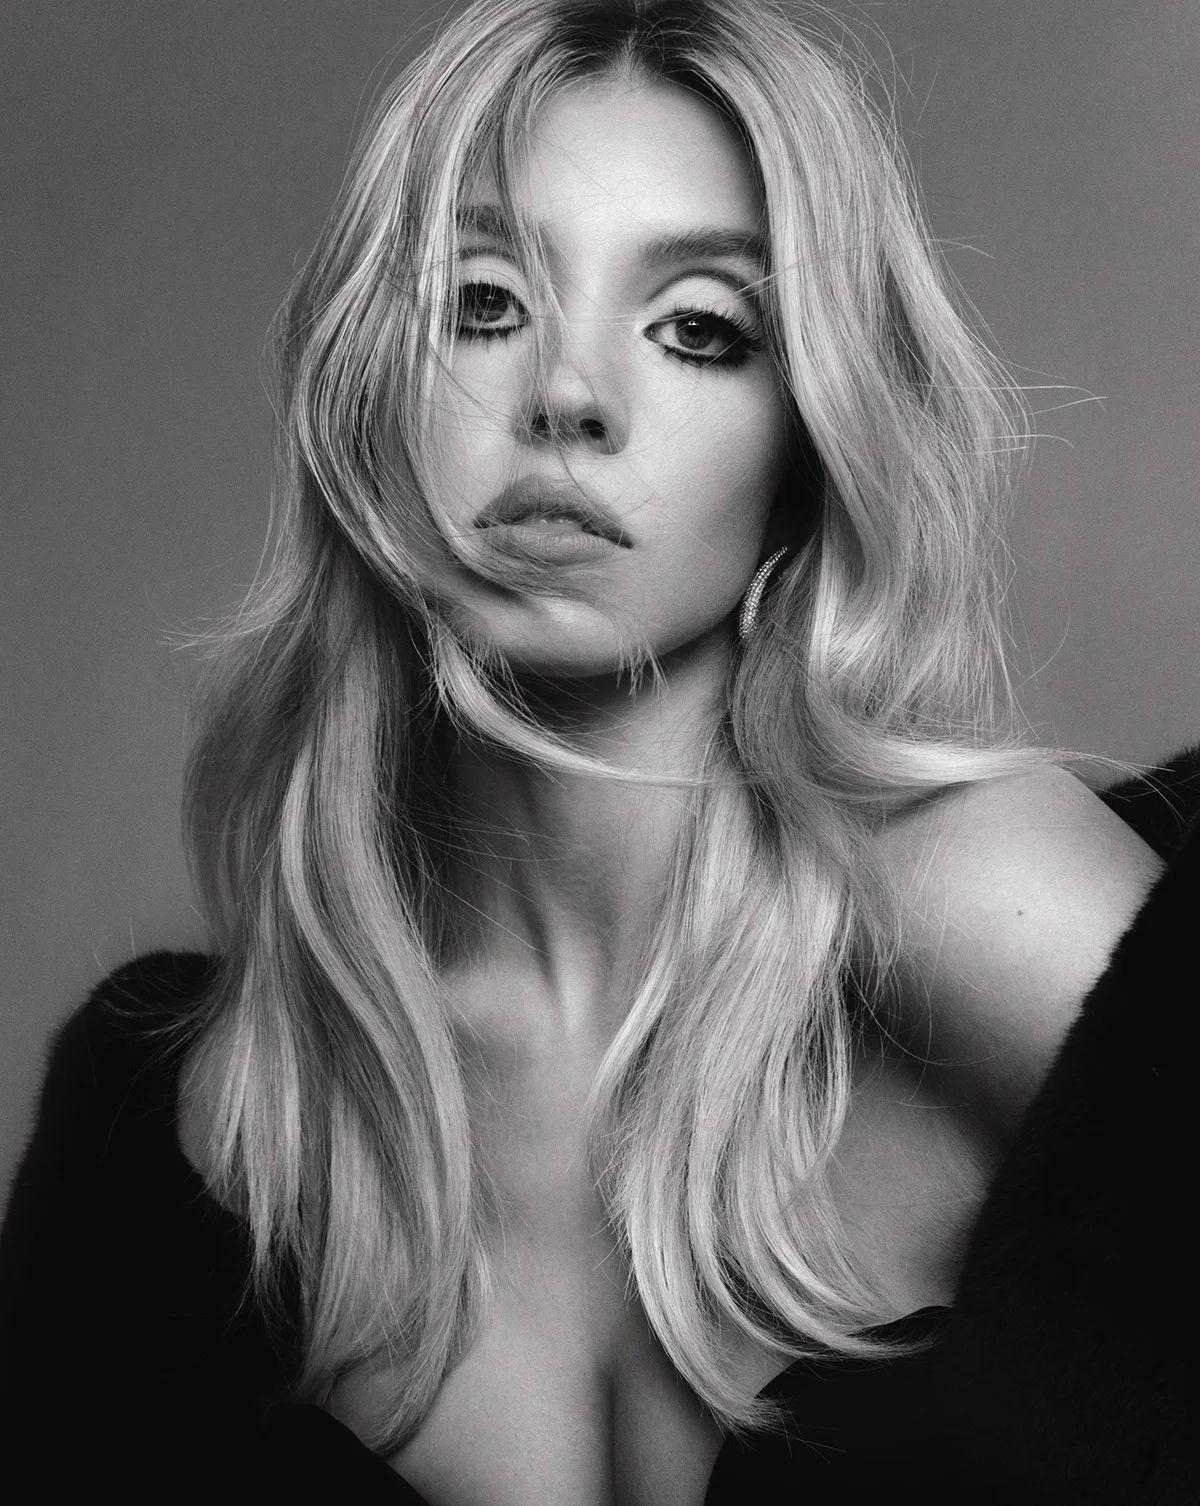 Sydney Sweeney by Elias Tahan for Madame Figaro April 2022